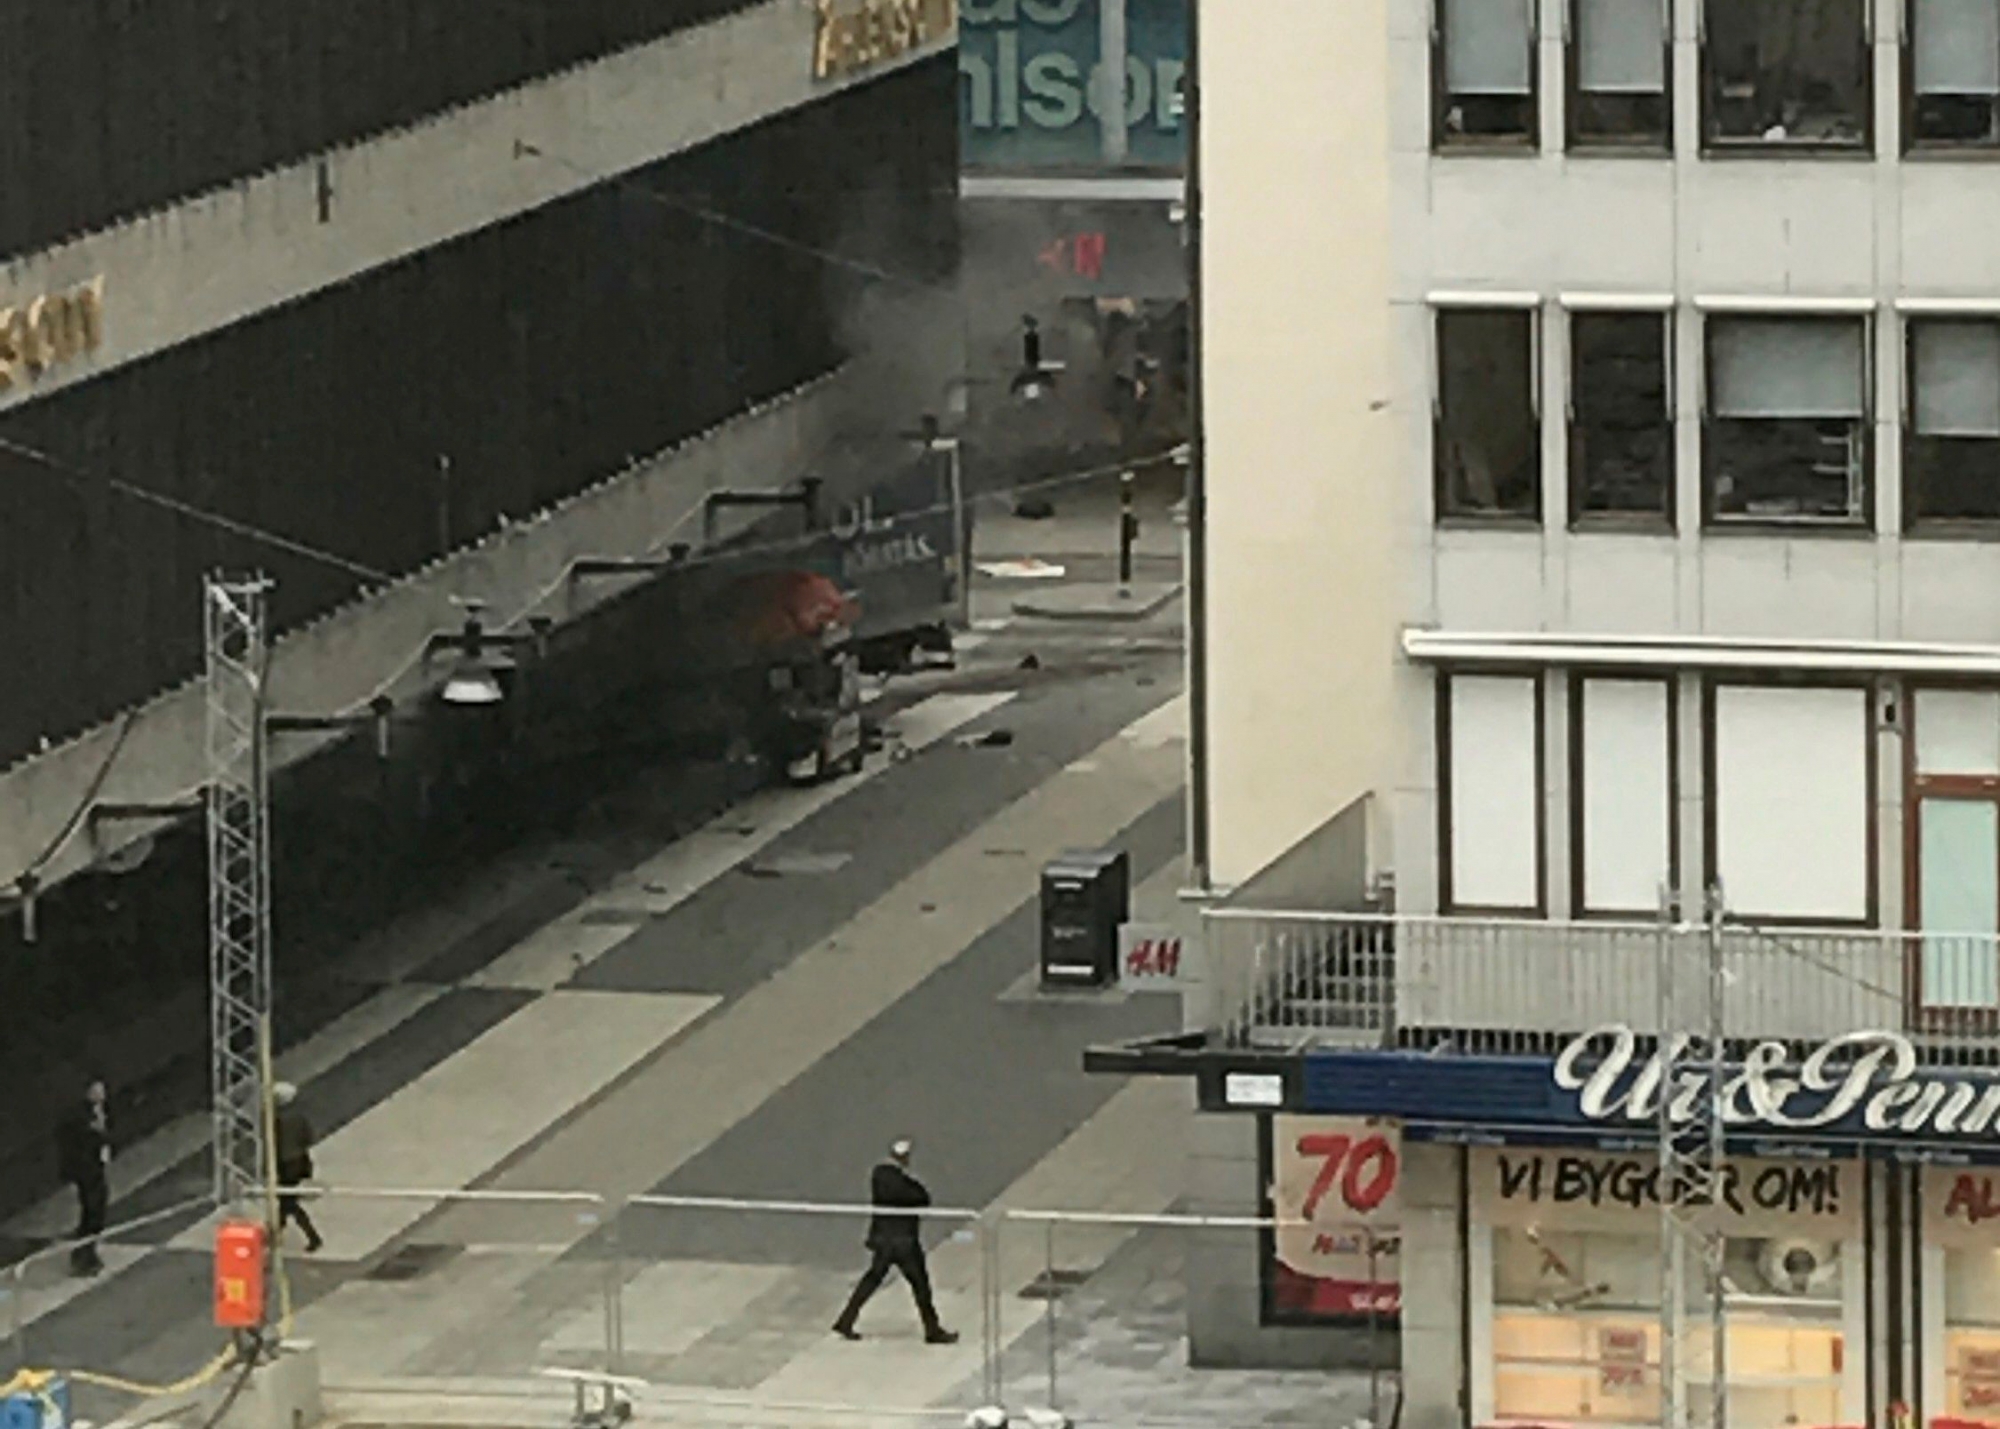 epa05894535 A view of a truck after it crashed into a Ahlens department store at Drottninggatan in central Stockholm, Sweden, 07 April 2017. A truck has driven into crowds on a street in central Stockholm, media reported quoting local police. An unknown number of people was said to be injured in the incident, media added.  EPA/ANDREAS SCHYMAN  SWEDEN OUT SWEDEN TRUCK CRASH